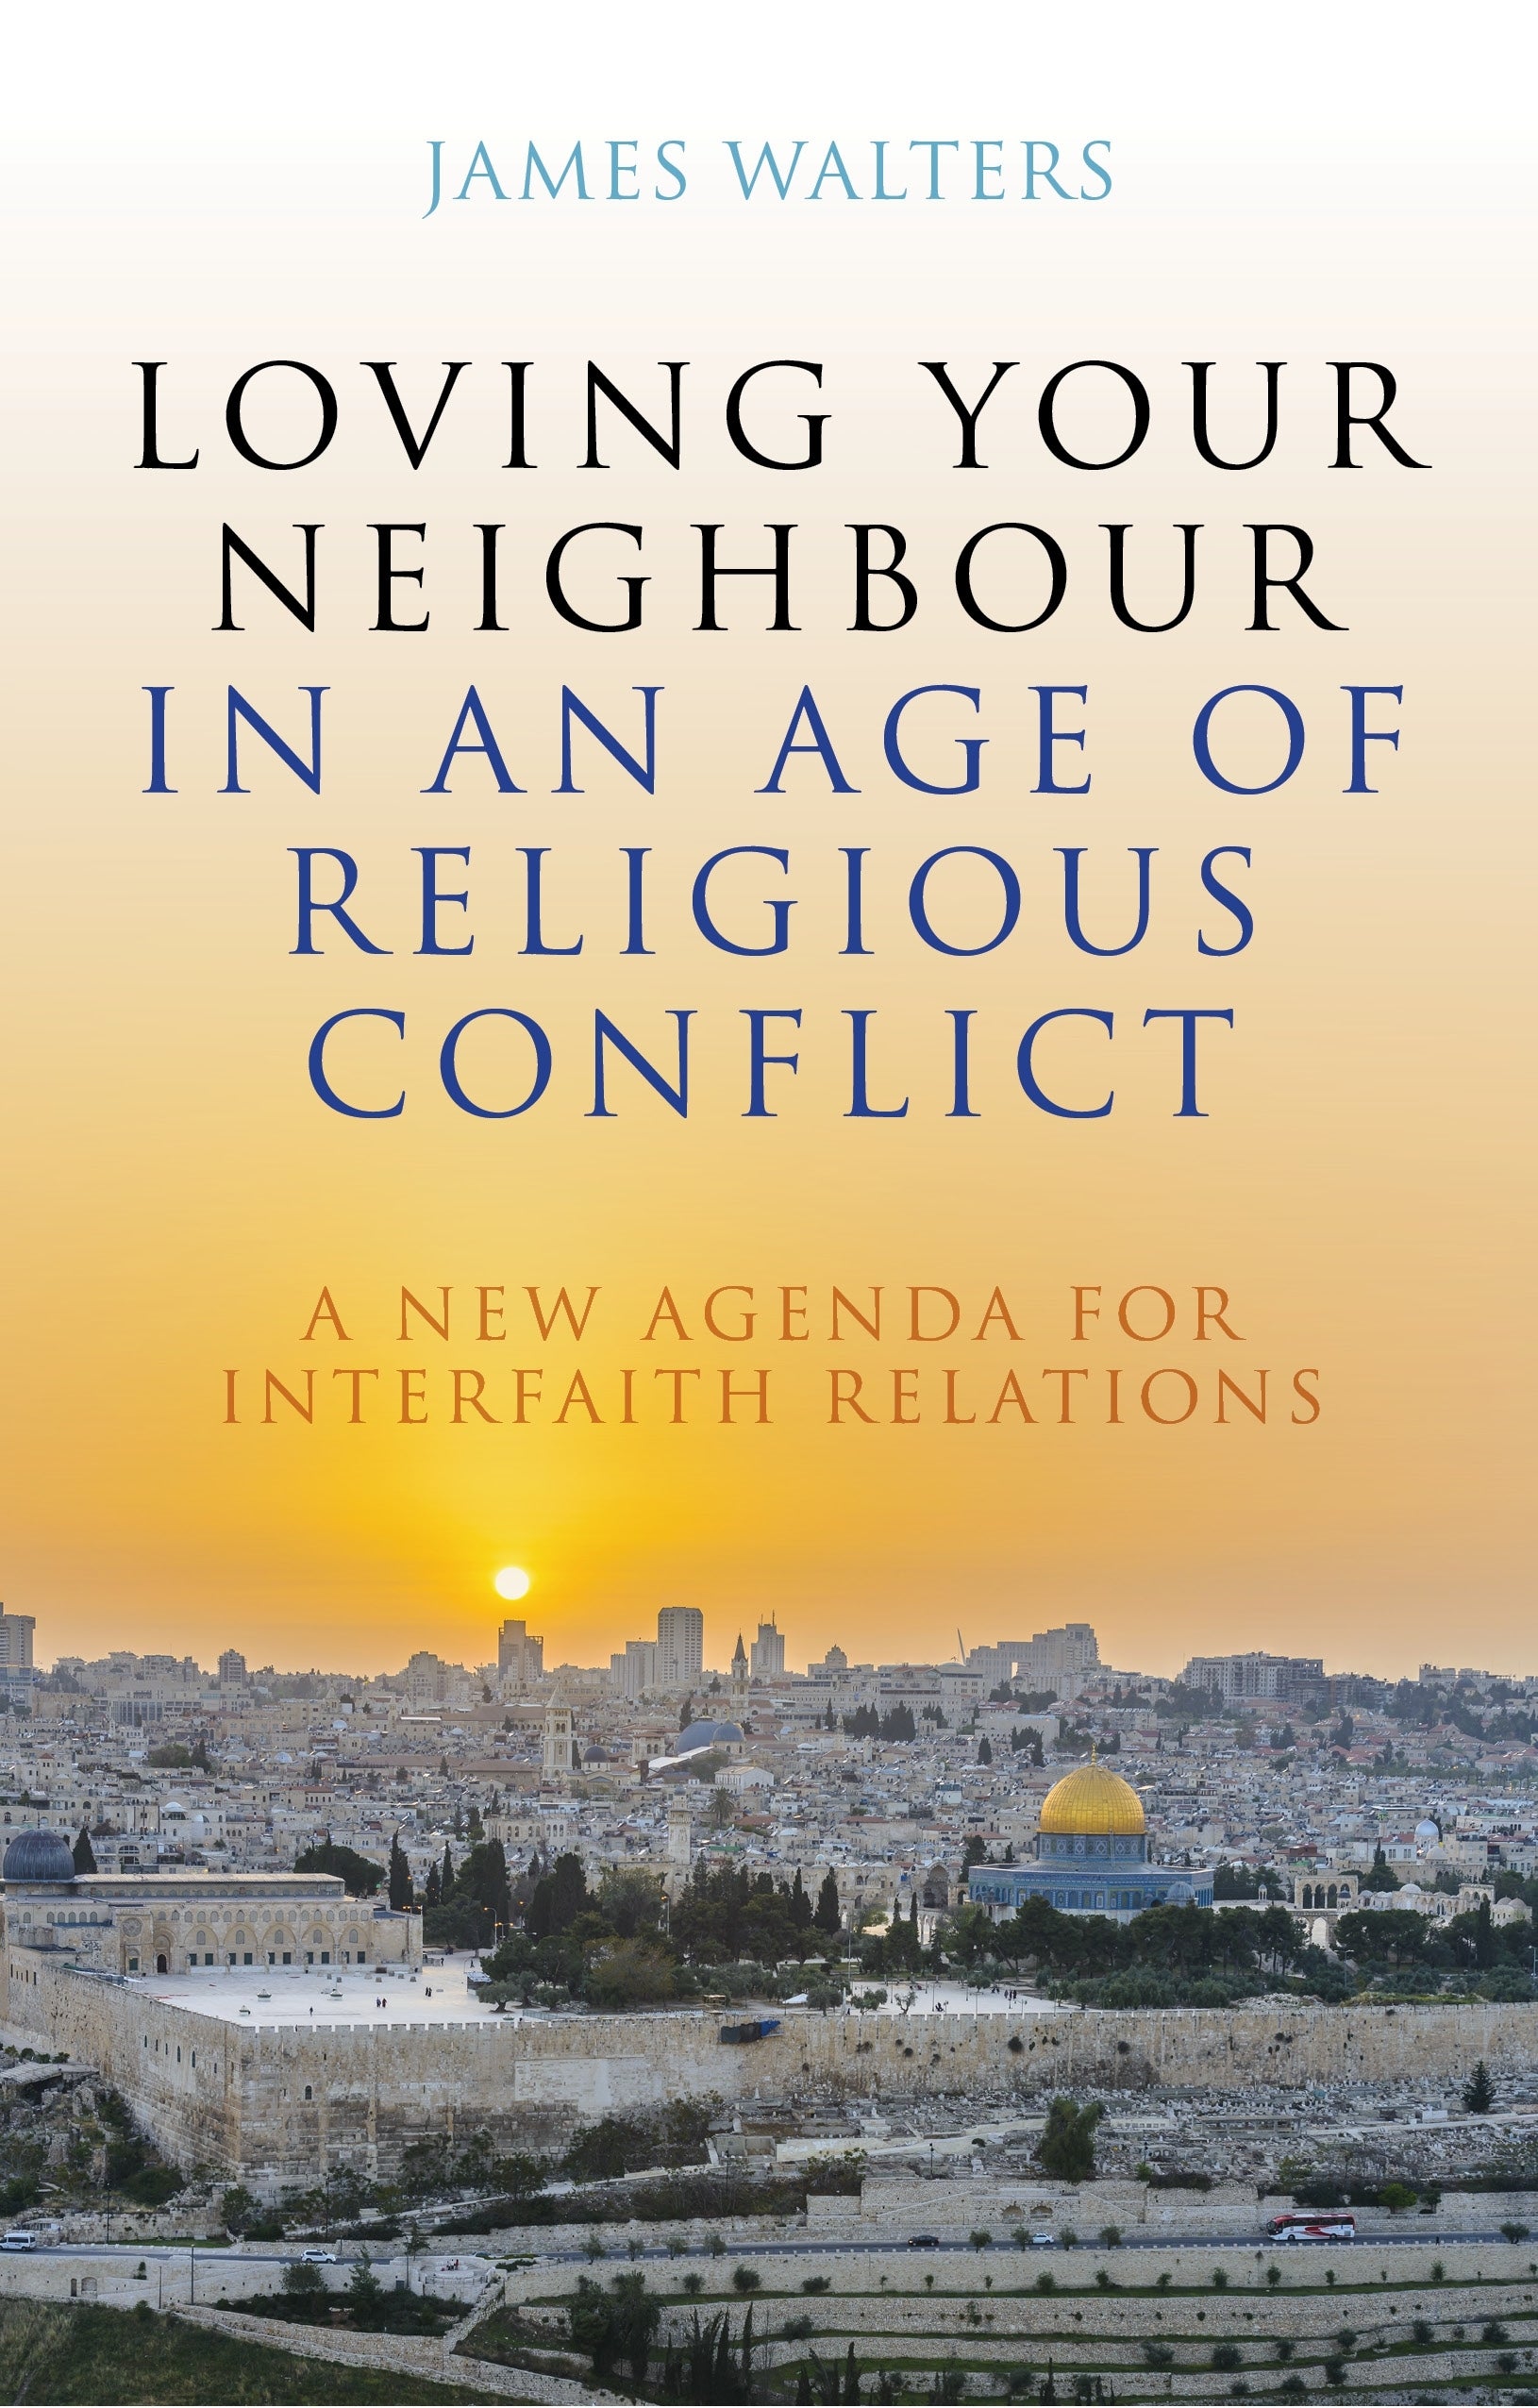 Loving Your Neighbour in an Age of Religious Conflict by James Walters